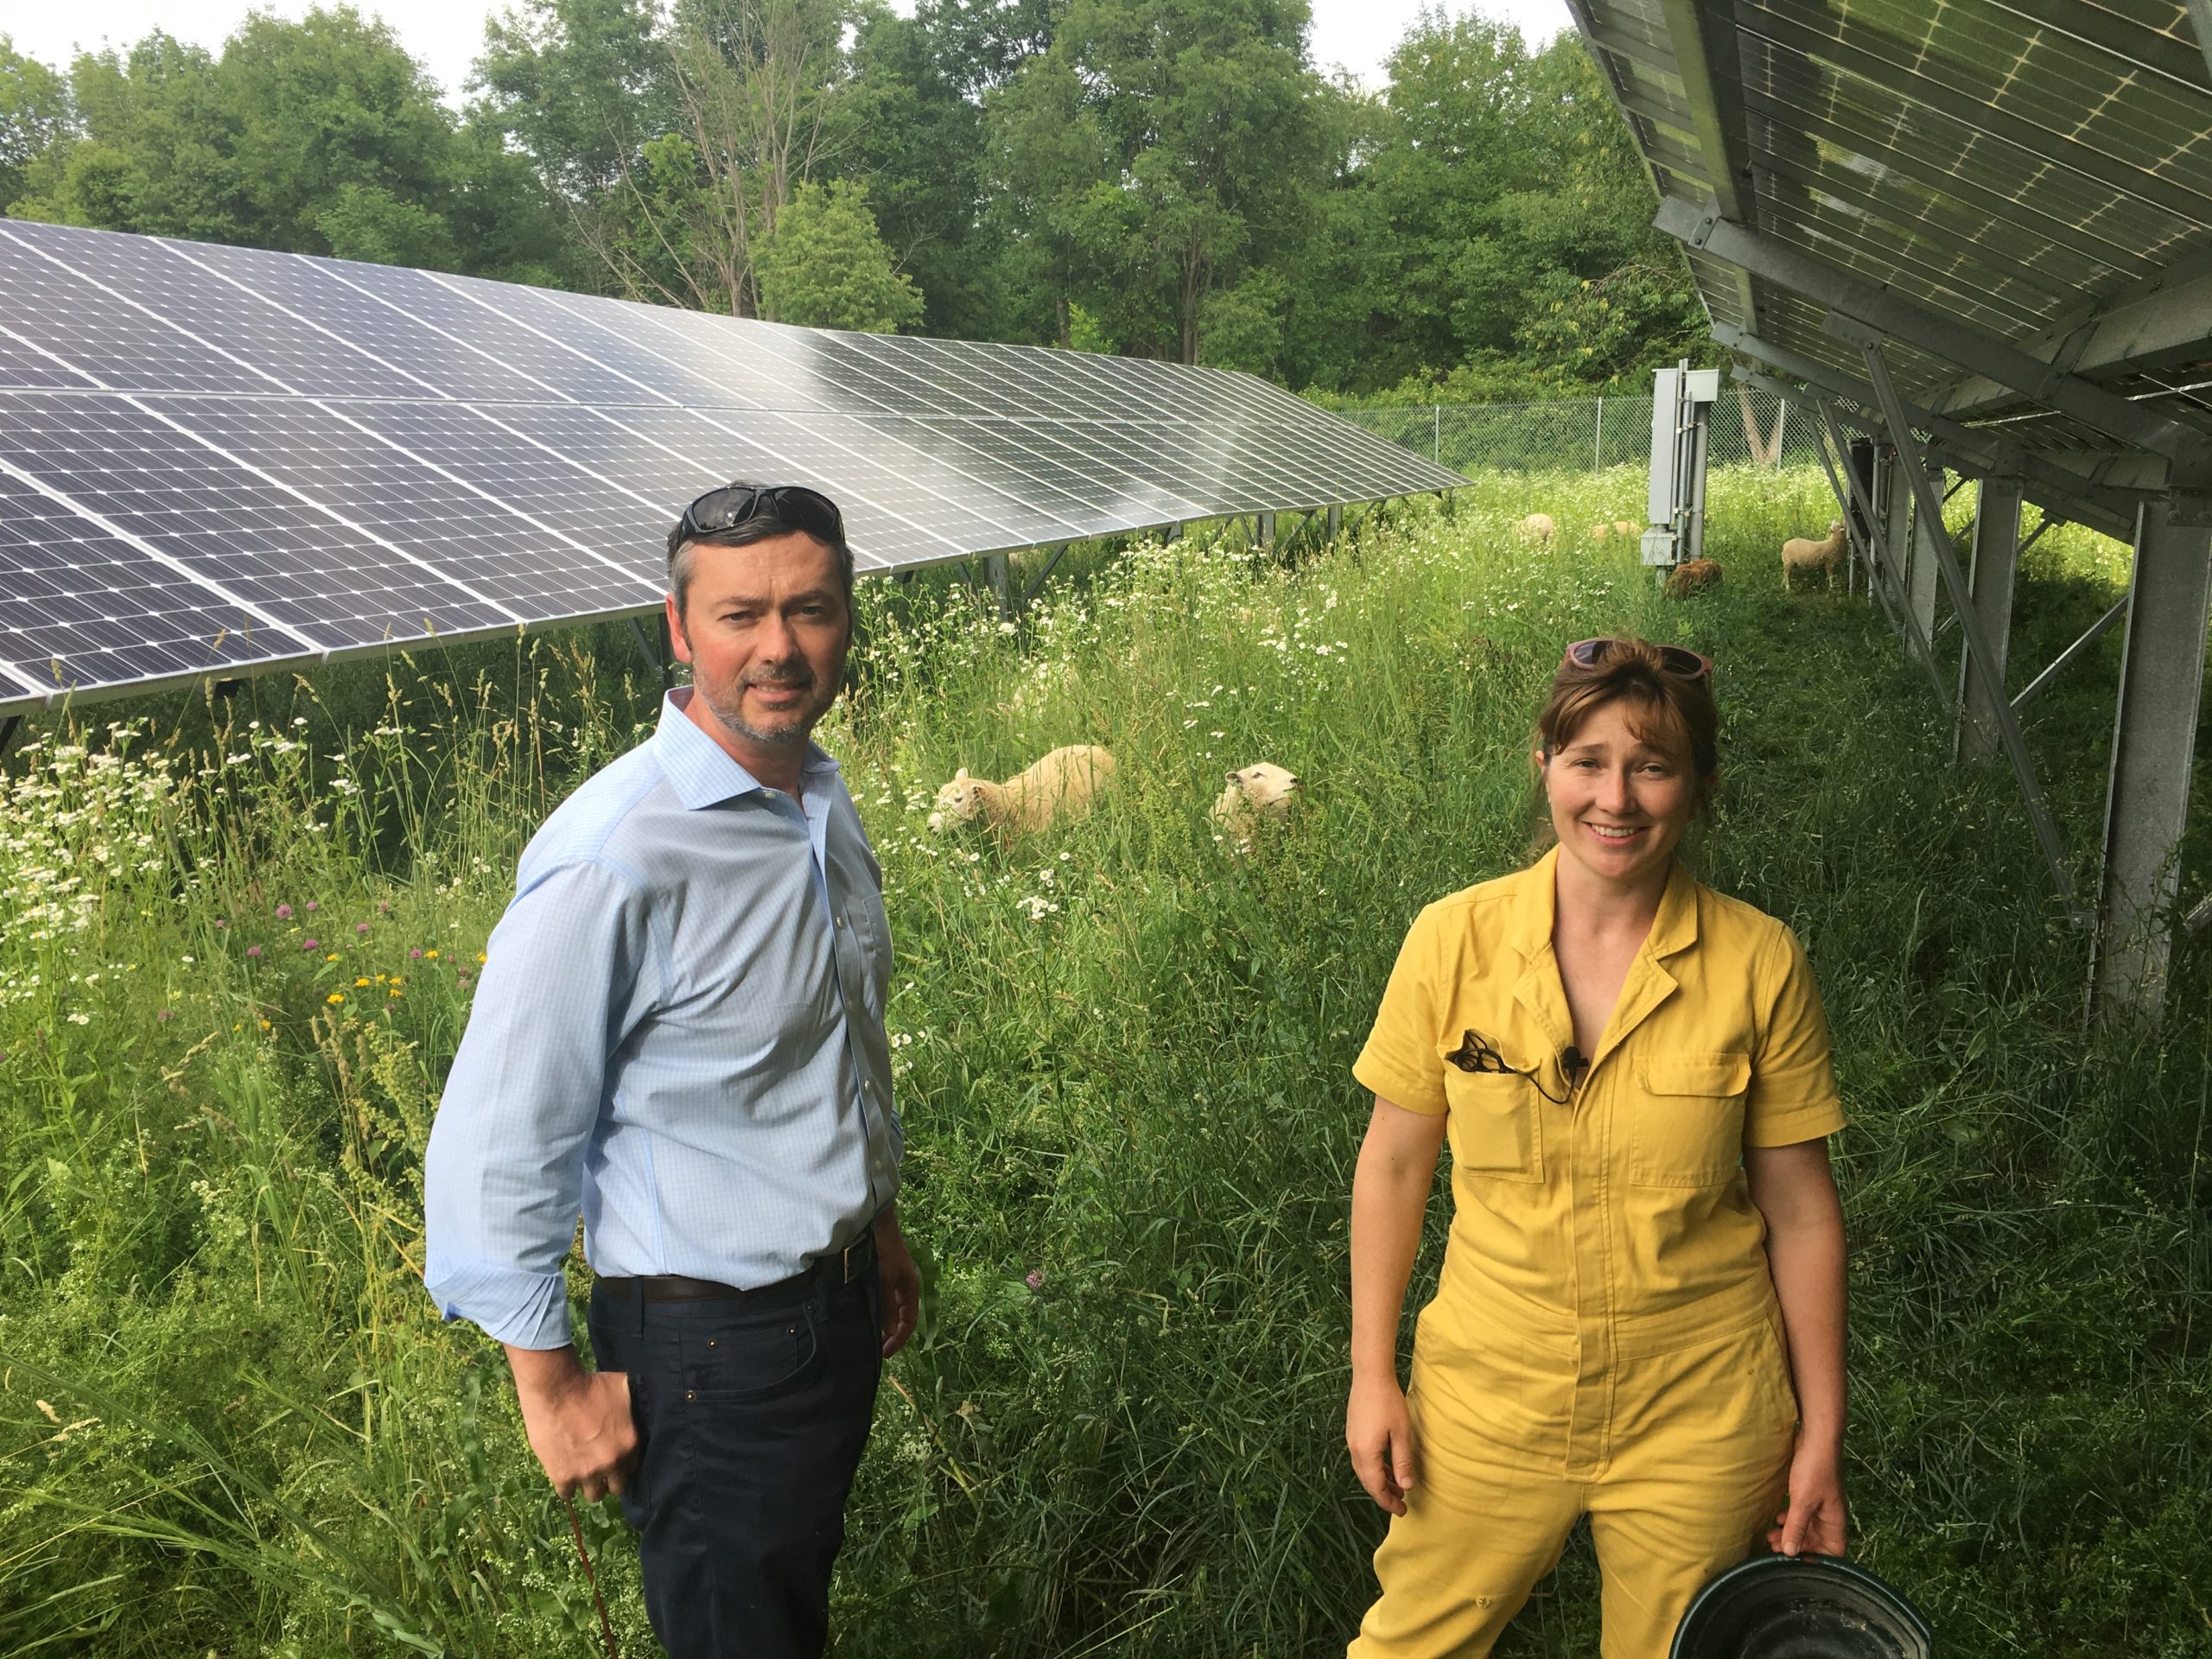 Ashley Bridge on the solar site she manages, with her boss from the solar company. Solar panels, grass, and sheep grazing in the background